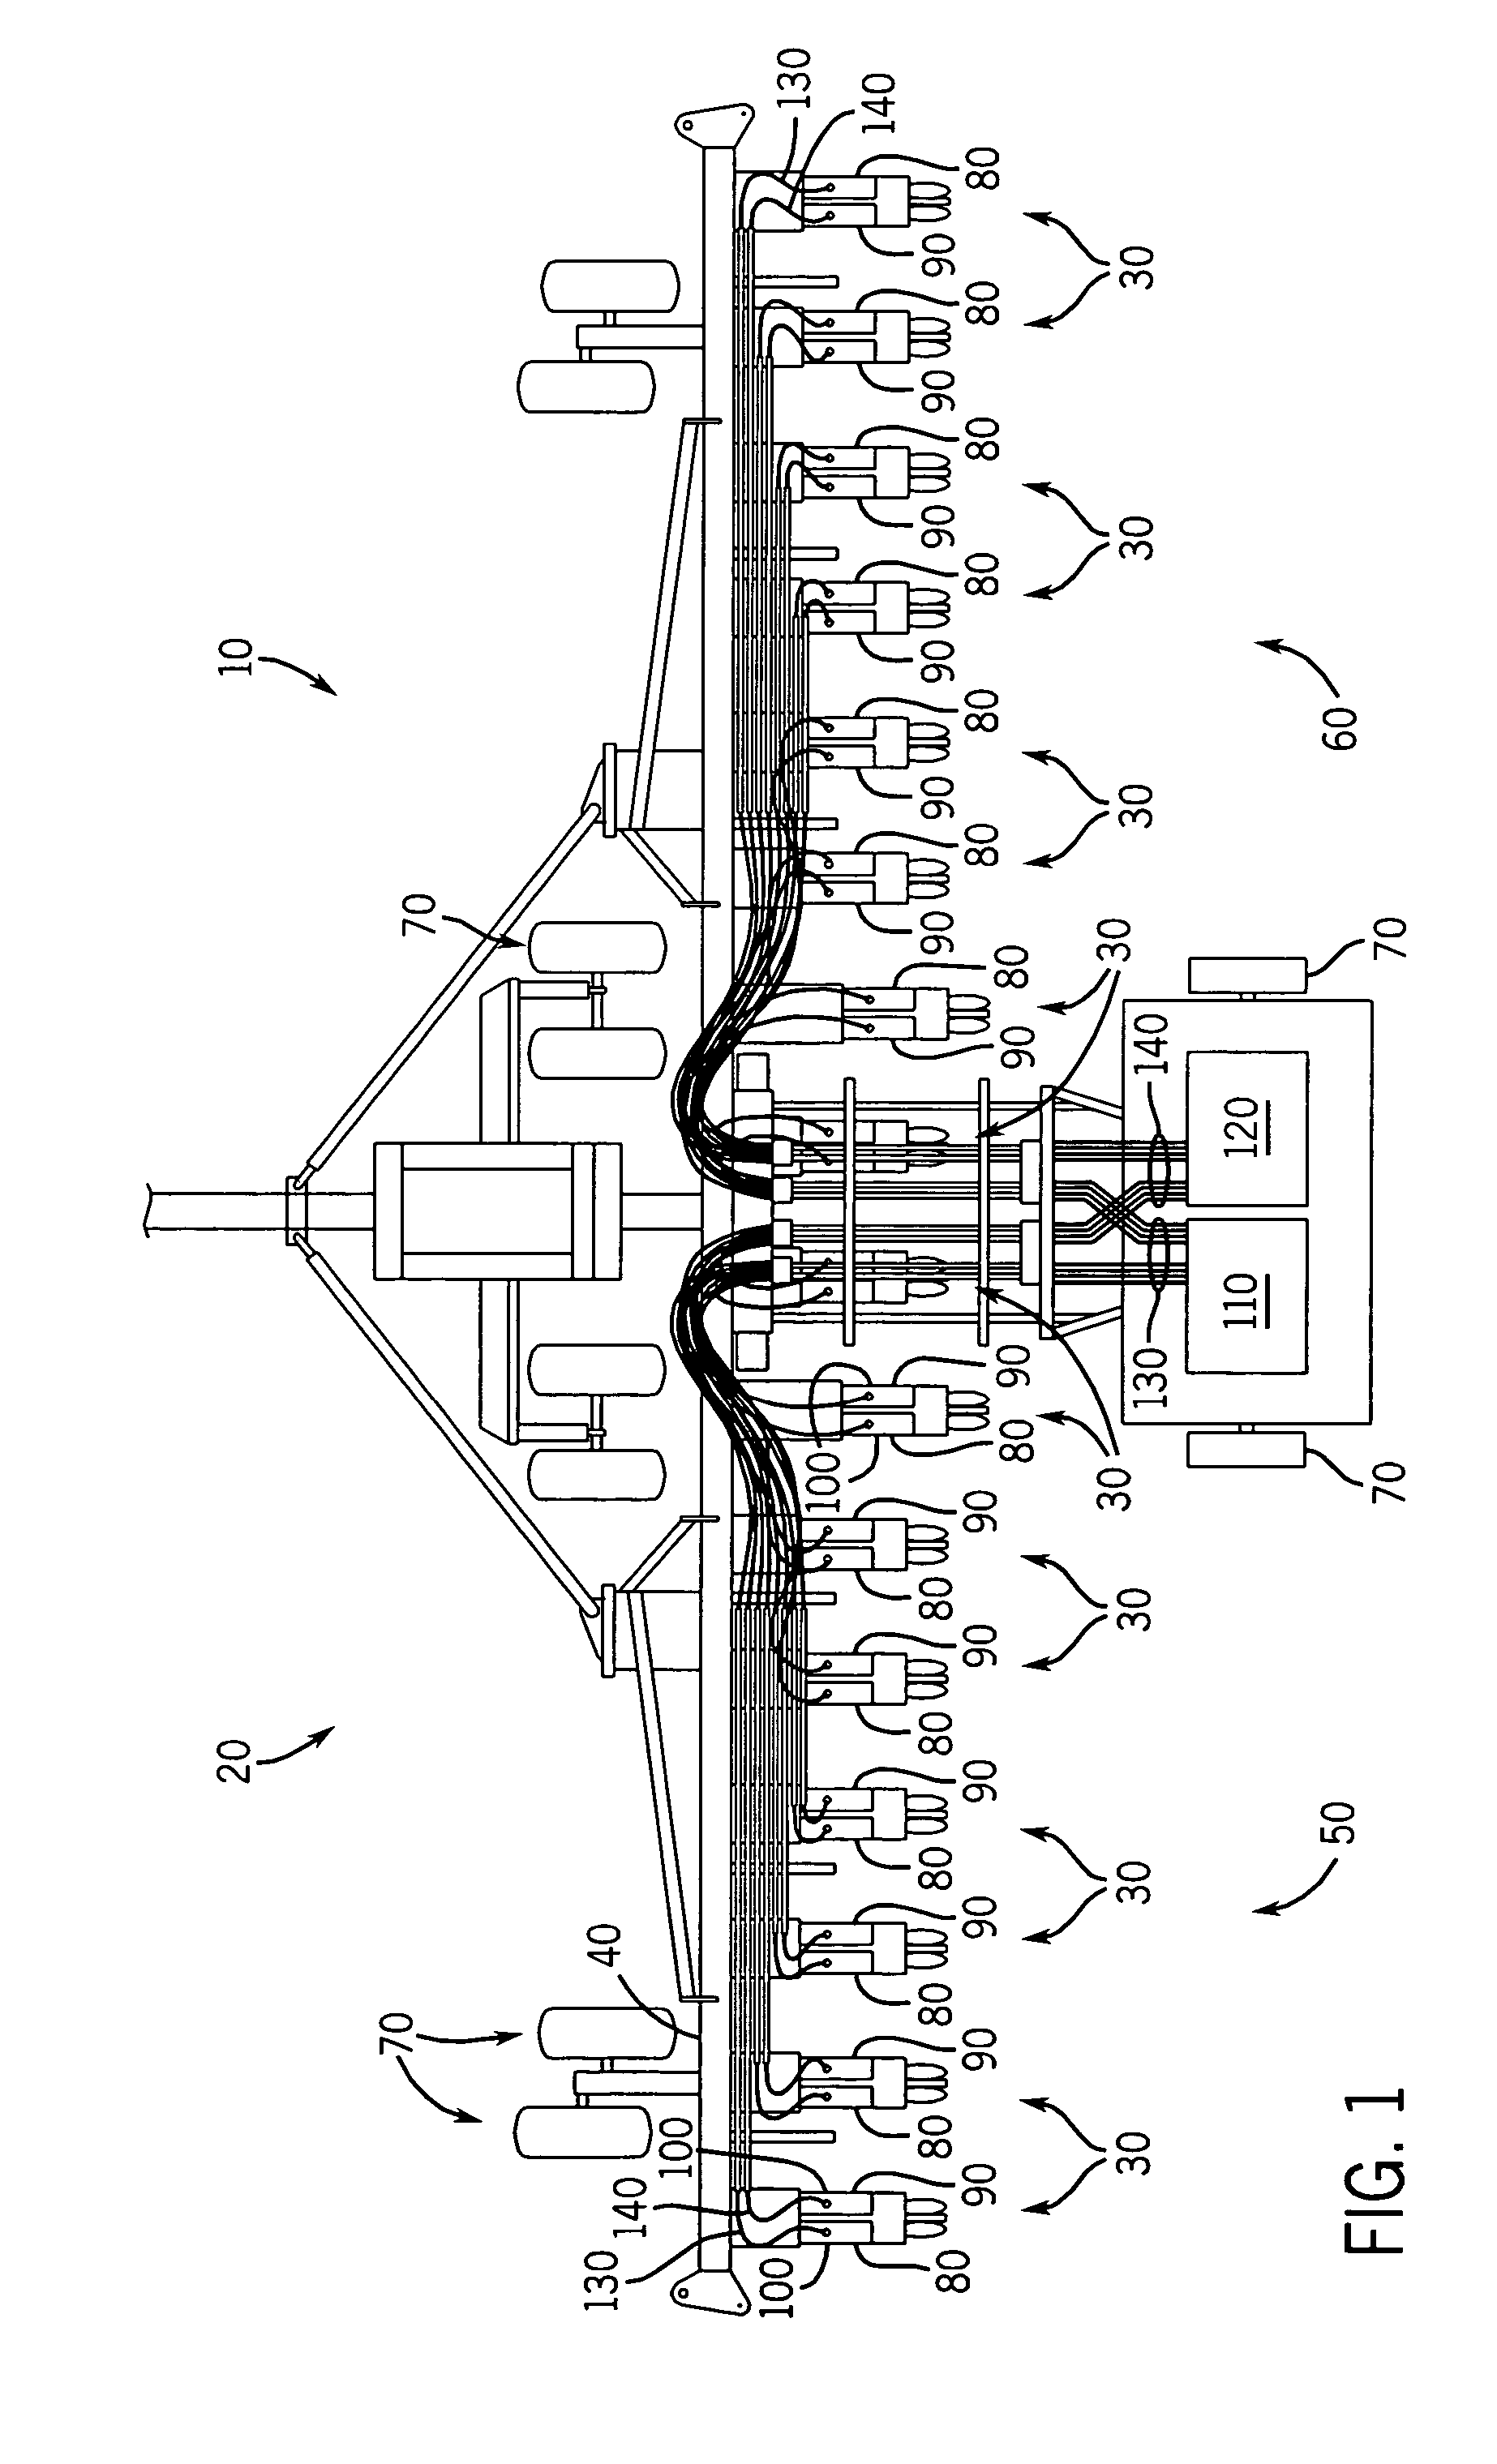 System and method for distributing multiple materials from an agricultural vehicle